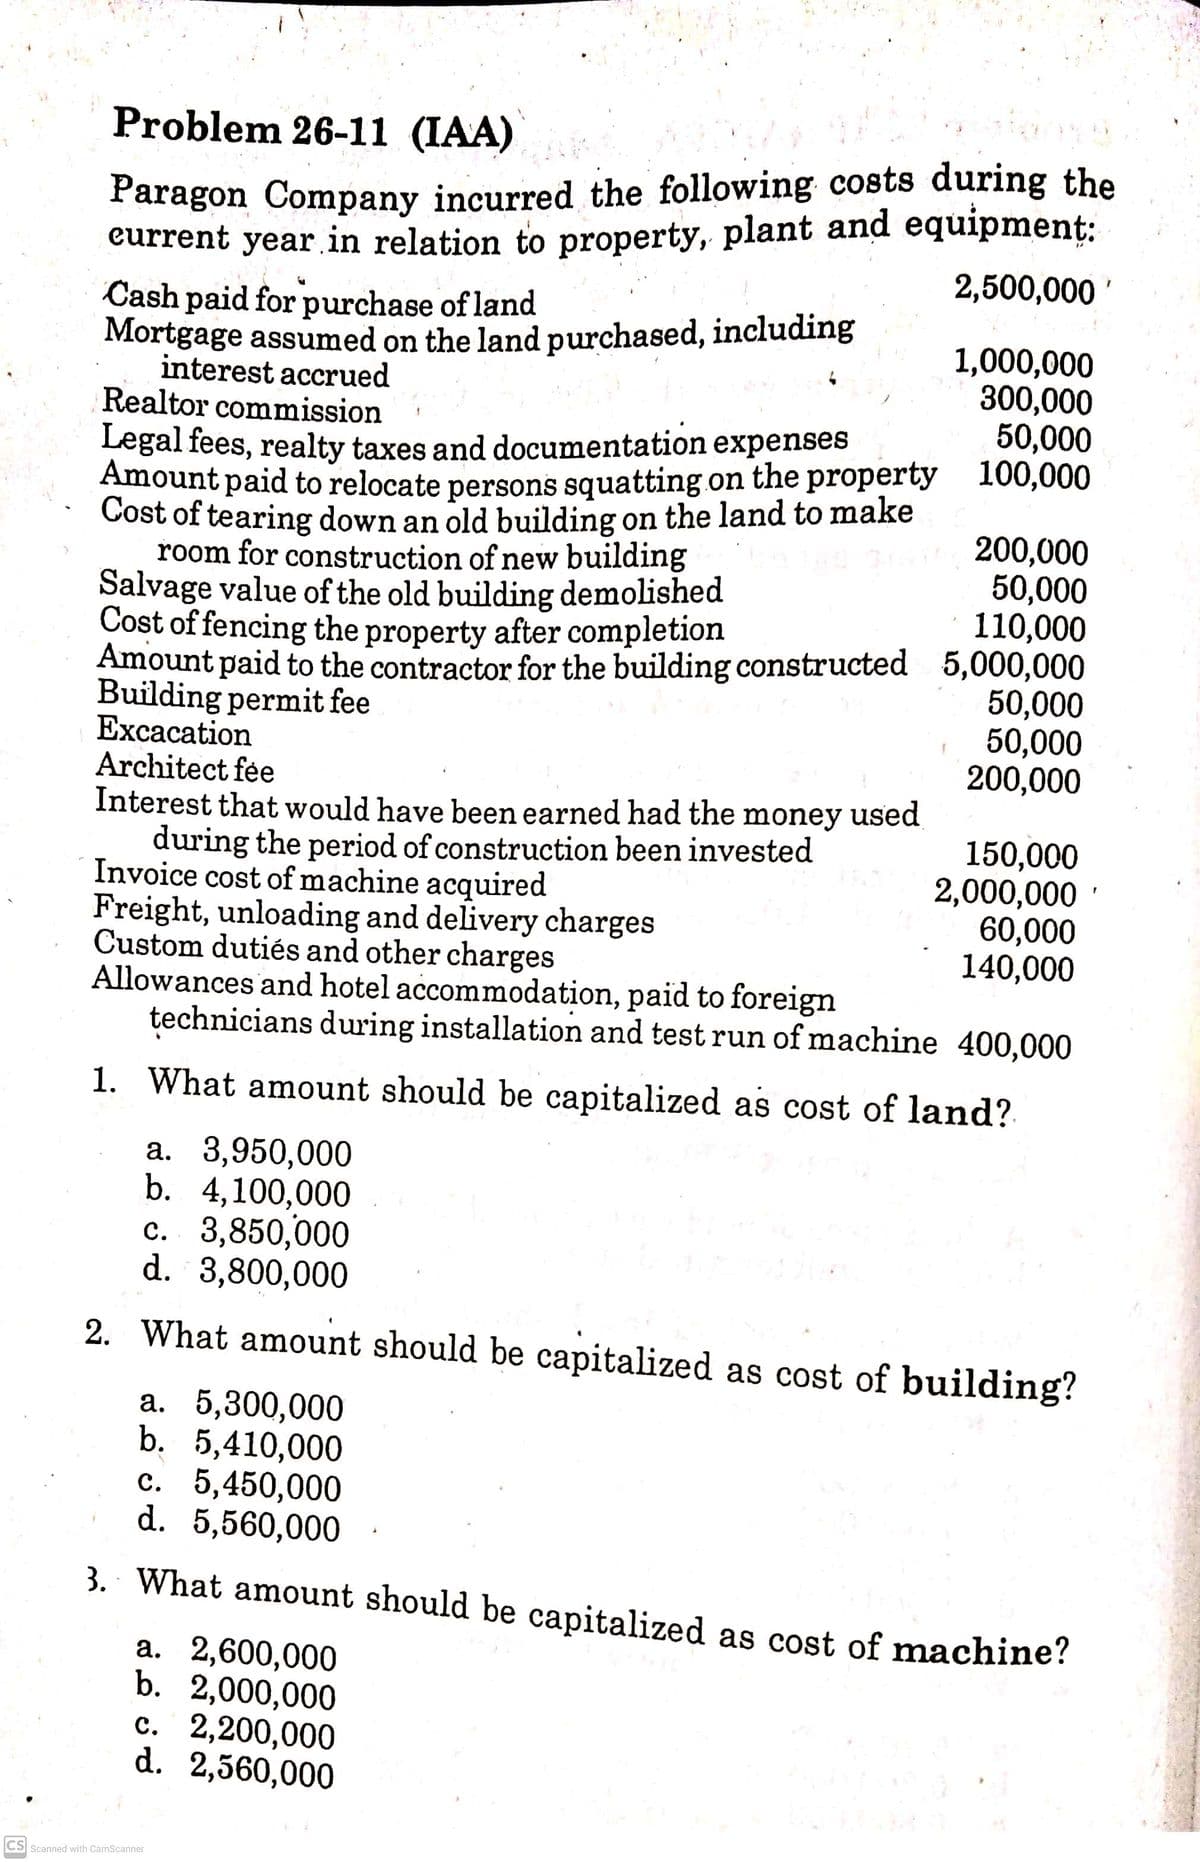 Problem 26-11 (IAA)
Paragon Company incurred the following costs during the
eurrent year in relation to property, plant and equipmenț:
2,500,000 '
Cash paid for purchase of land
Mortgage assumed on the land purchased, including
interest accrued
Realtor commission
1,000,000
300,000
50,000
Legal fees, realty taxes and documentation expenses
Amount paid to relocate persons squatting on the property 100,000
Cost of tearing down an old building on the land to make
room for construction of new building
Salvage value of the old building demolished
Cost of fencing the property after completion
Amount paid to the contractor for the building constructed 5,000,000
Building permit fee
Еxcacation
Architect fée
Interest that would have been earned had the money used
during the period of construction been invested
Invoice cost of machine acquired
Freight, unloading and delivery charges
Custom dutiés and other charges
Allowances and hotel accommodation, paid to foreign
technicians during installation and test run of machine 400,000
200,000
50,000
110,000
50,000
50,000
200,000
150,000
2,000,000
60,000
140,000
1. What amount should be capitalized as cost of land?
а. 3,950,000
b. 4,100,000
c. 3,850,000
d. 3,800,000
2. What amount should be capitalized as cost of building?
a. 5,300,000
b. 5,410,000
с. 5,450,000
d. 5,560,000
3. What amount should be capitalized as cost of machine?
a. 2,600,000
b. 2,000,000
с. 2,200,000
d. 2,560,000
CS Scanned with CamScanner
